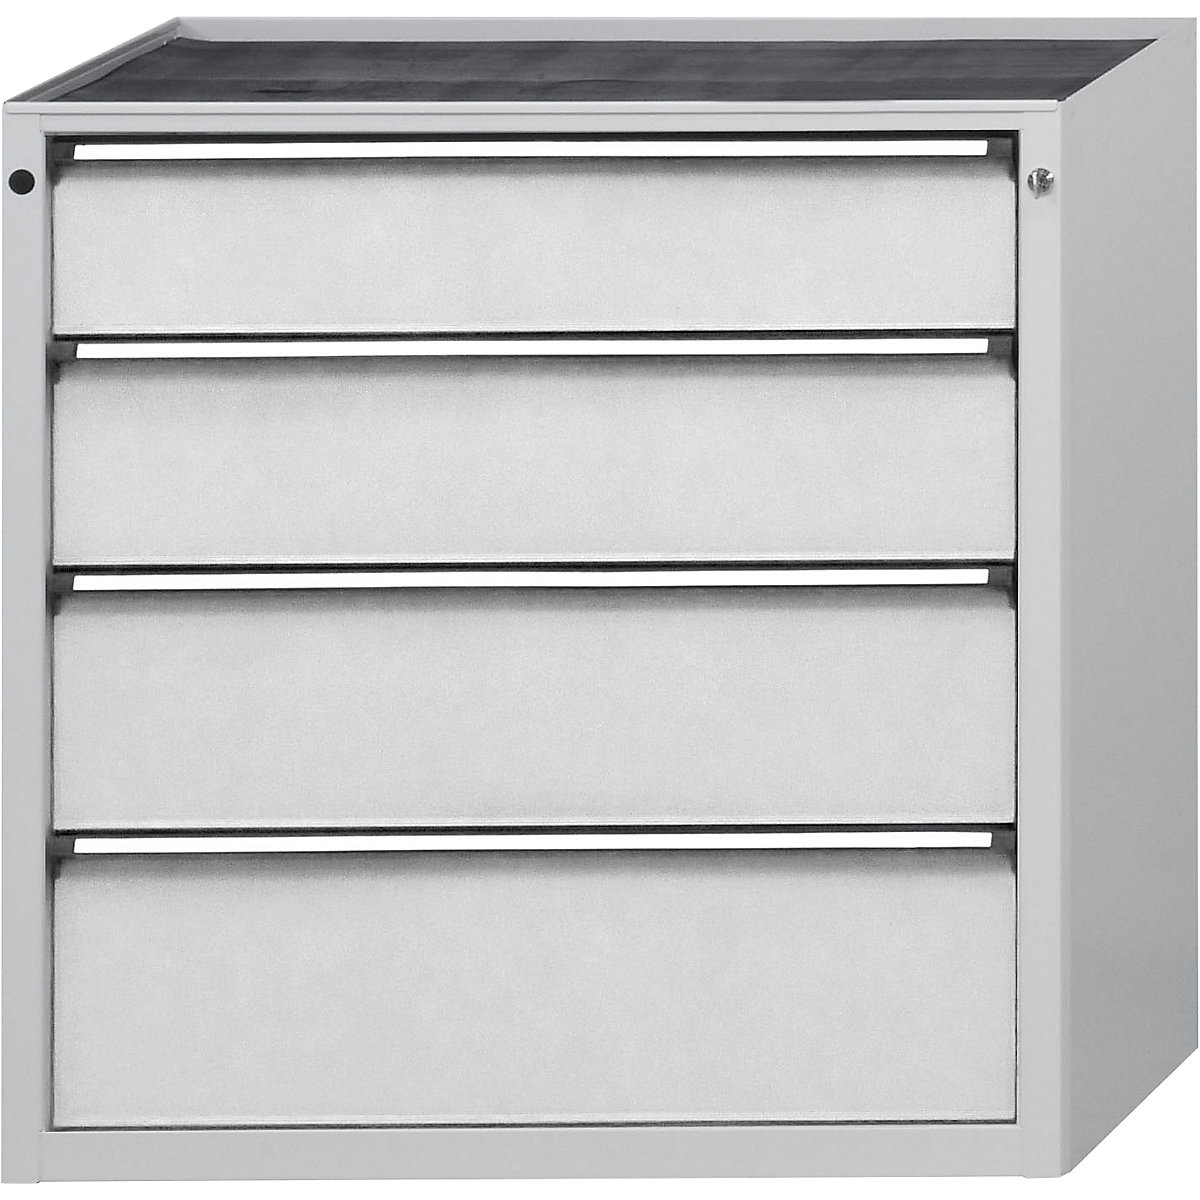 Drawer cupboard – ANKE, WxD 760 x 675 mm, 4 drawers, height 980 mm, front in light grey-18